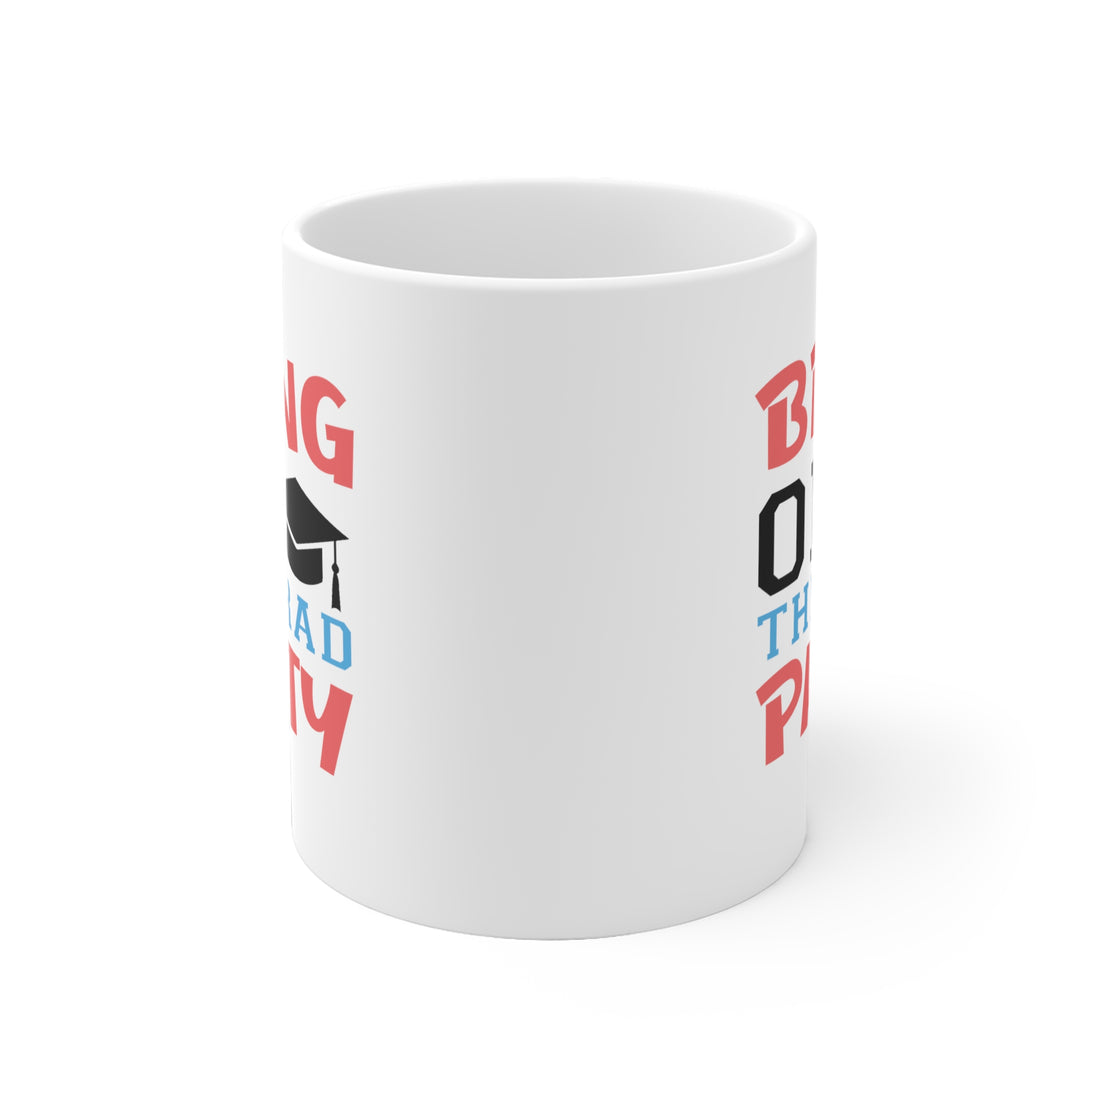 Bring On The Grad Party - White Ceramic Mug 2 sizes Available